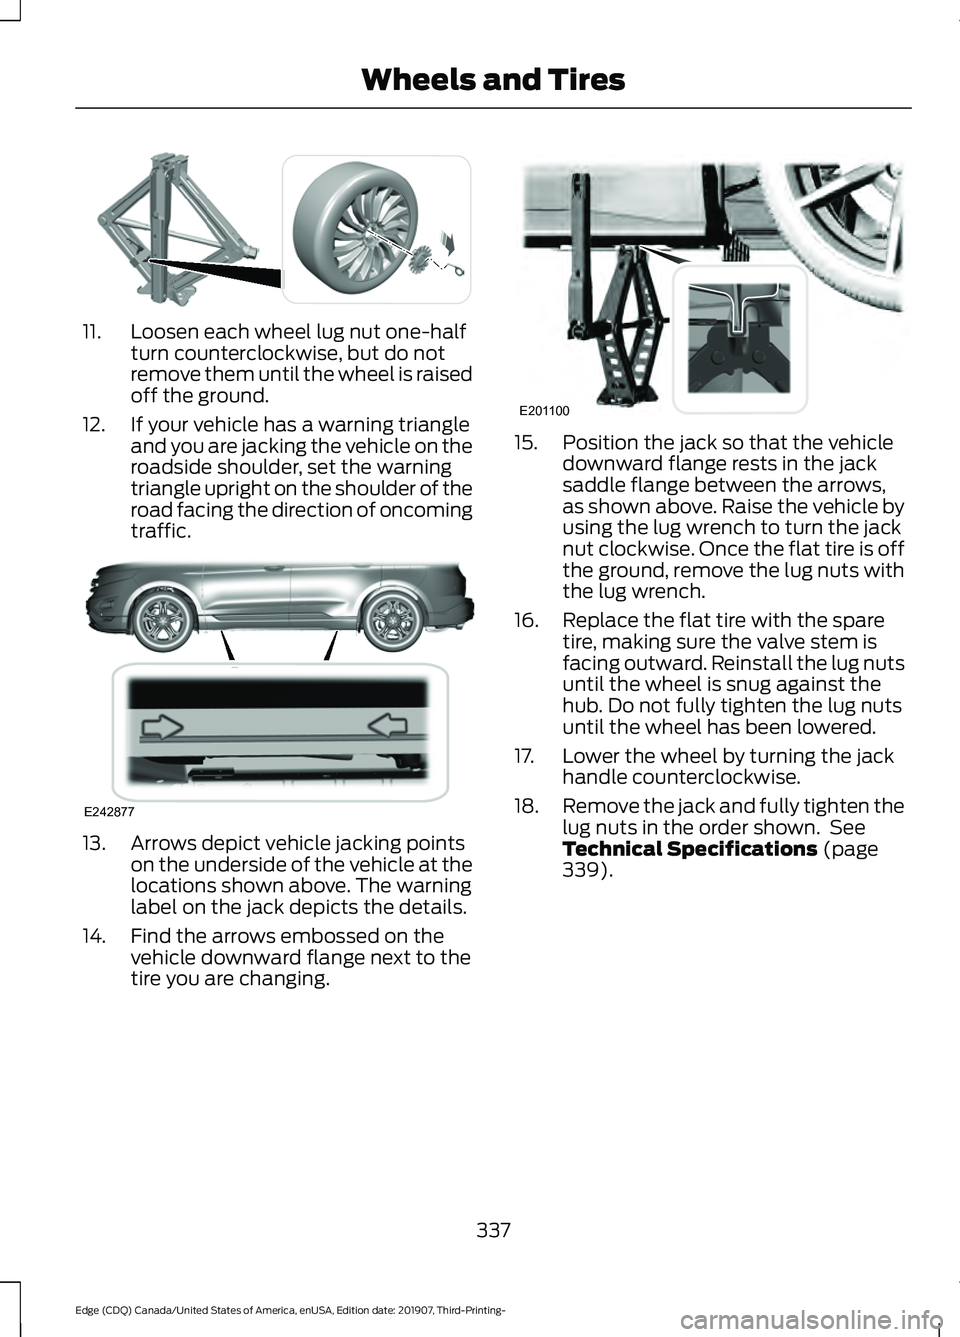 FORD EDGE 2020  Owners Manual 11. Loosen each wheel lug nut one-half
turn counterclockwise, but do not
remove them until the wheel is raised
off the ground.
12. If your vehicle has a warning triangle and you are jacking the vehicl